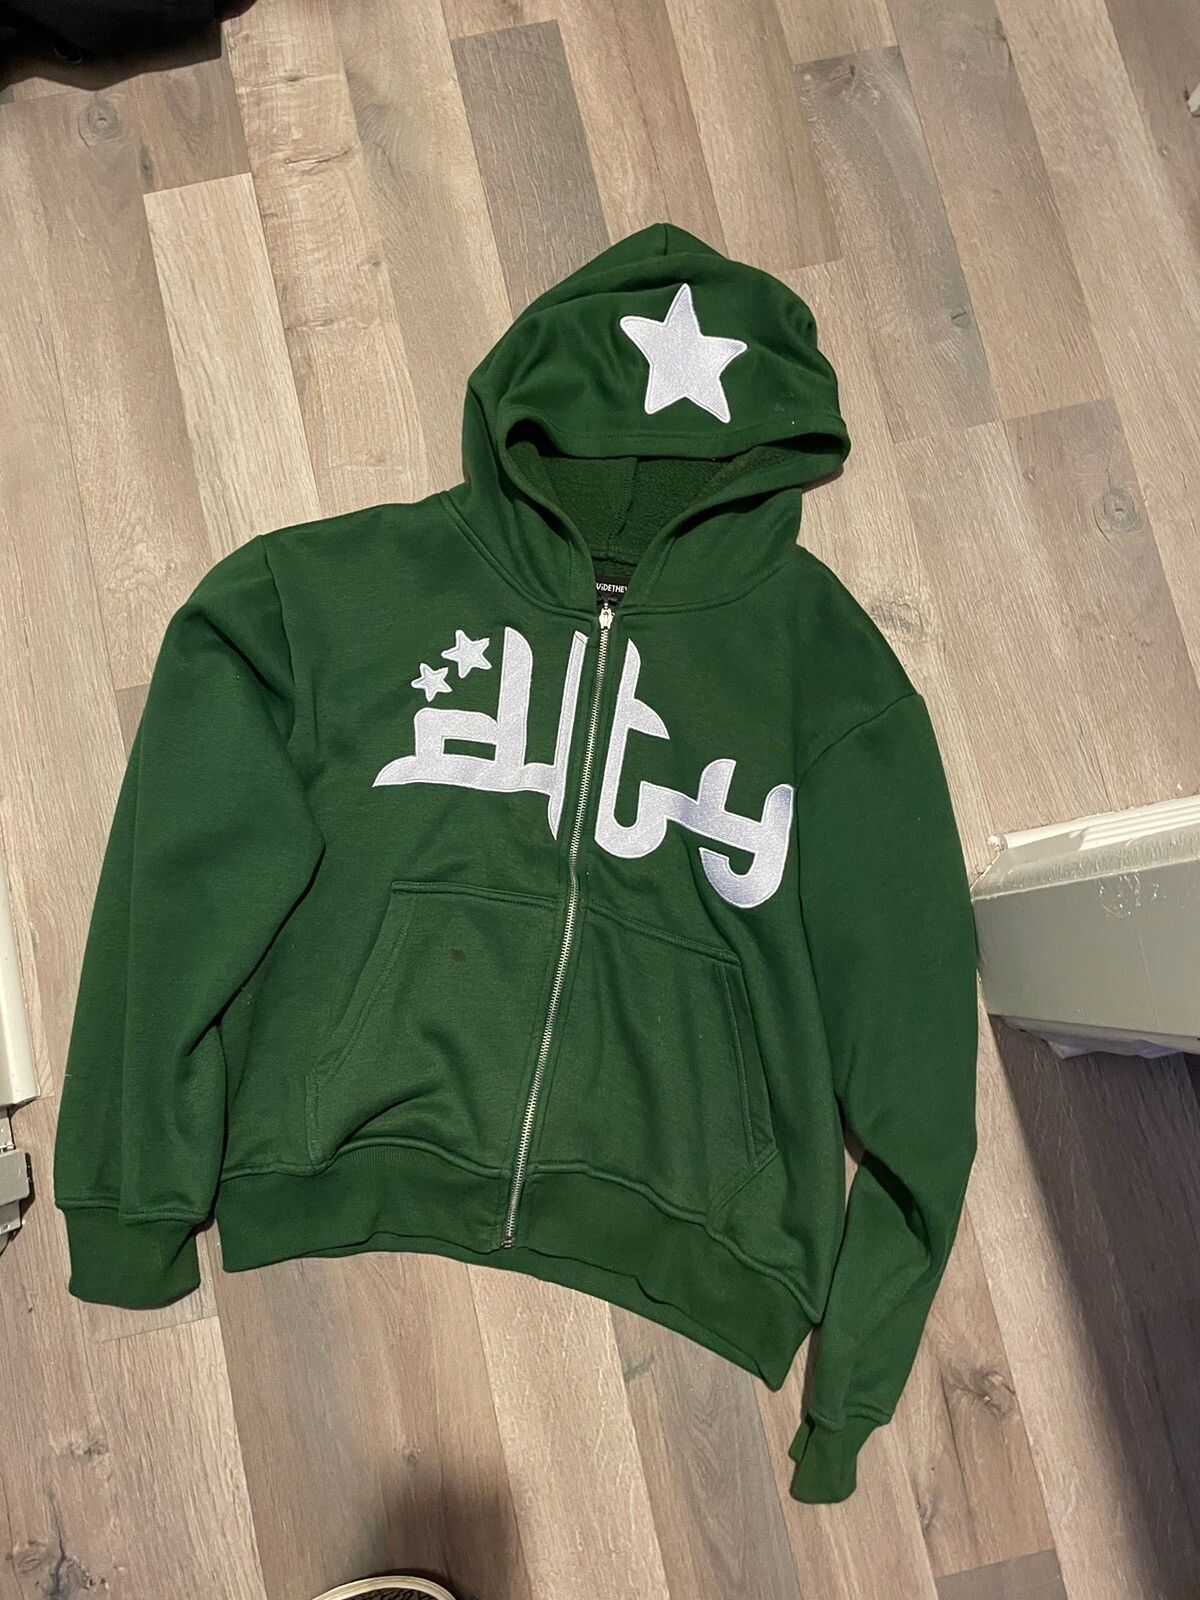 Divide The Youth Divide The Youth Green Zip up | Grailed